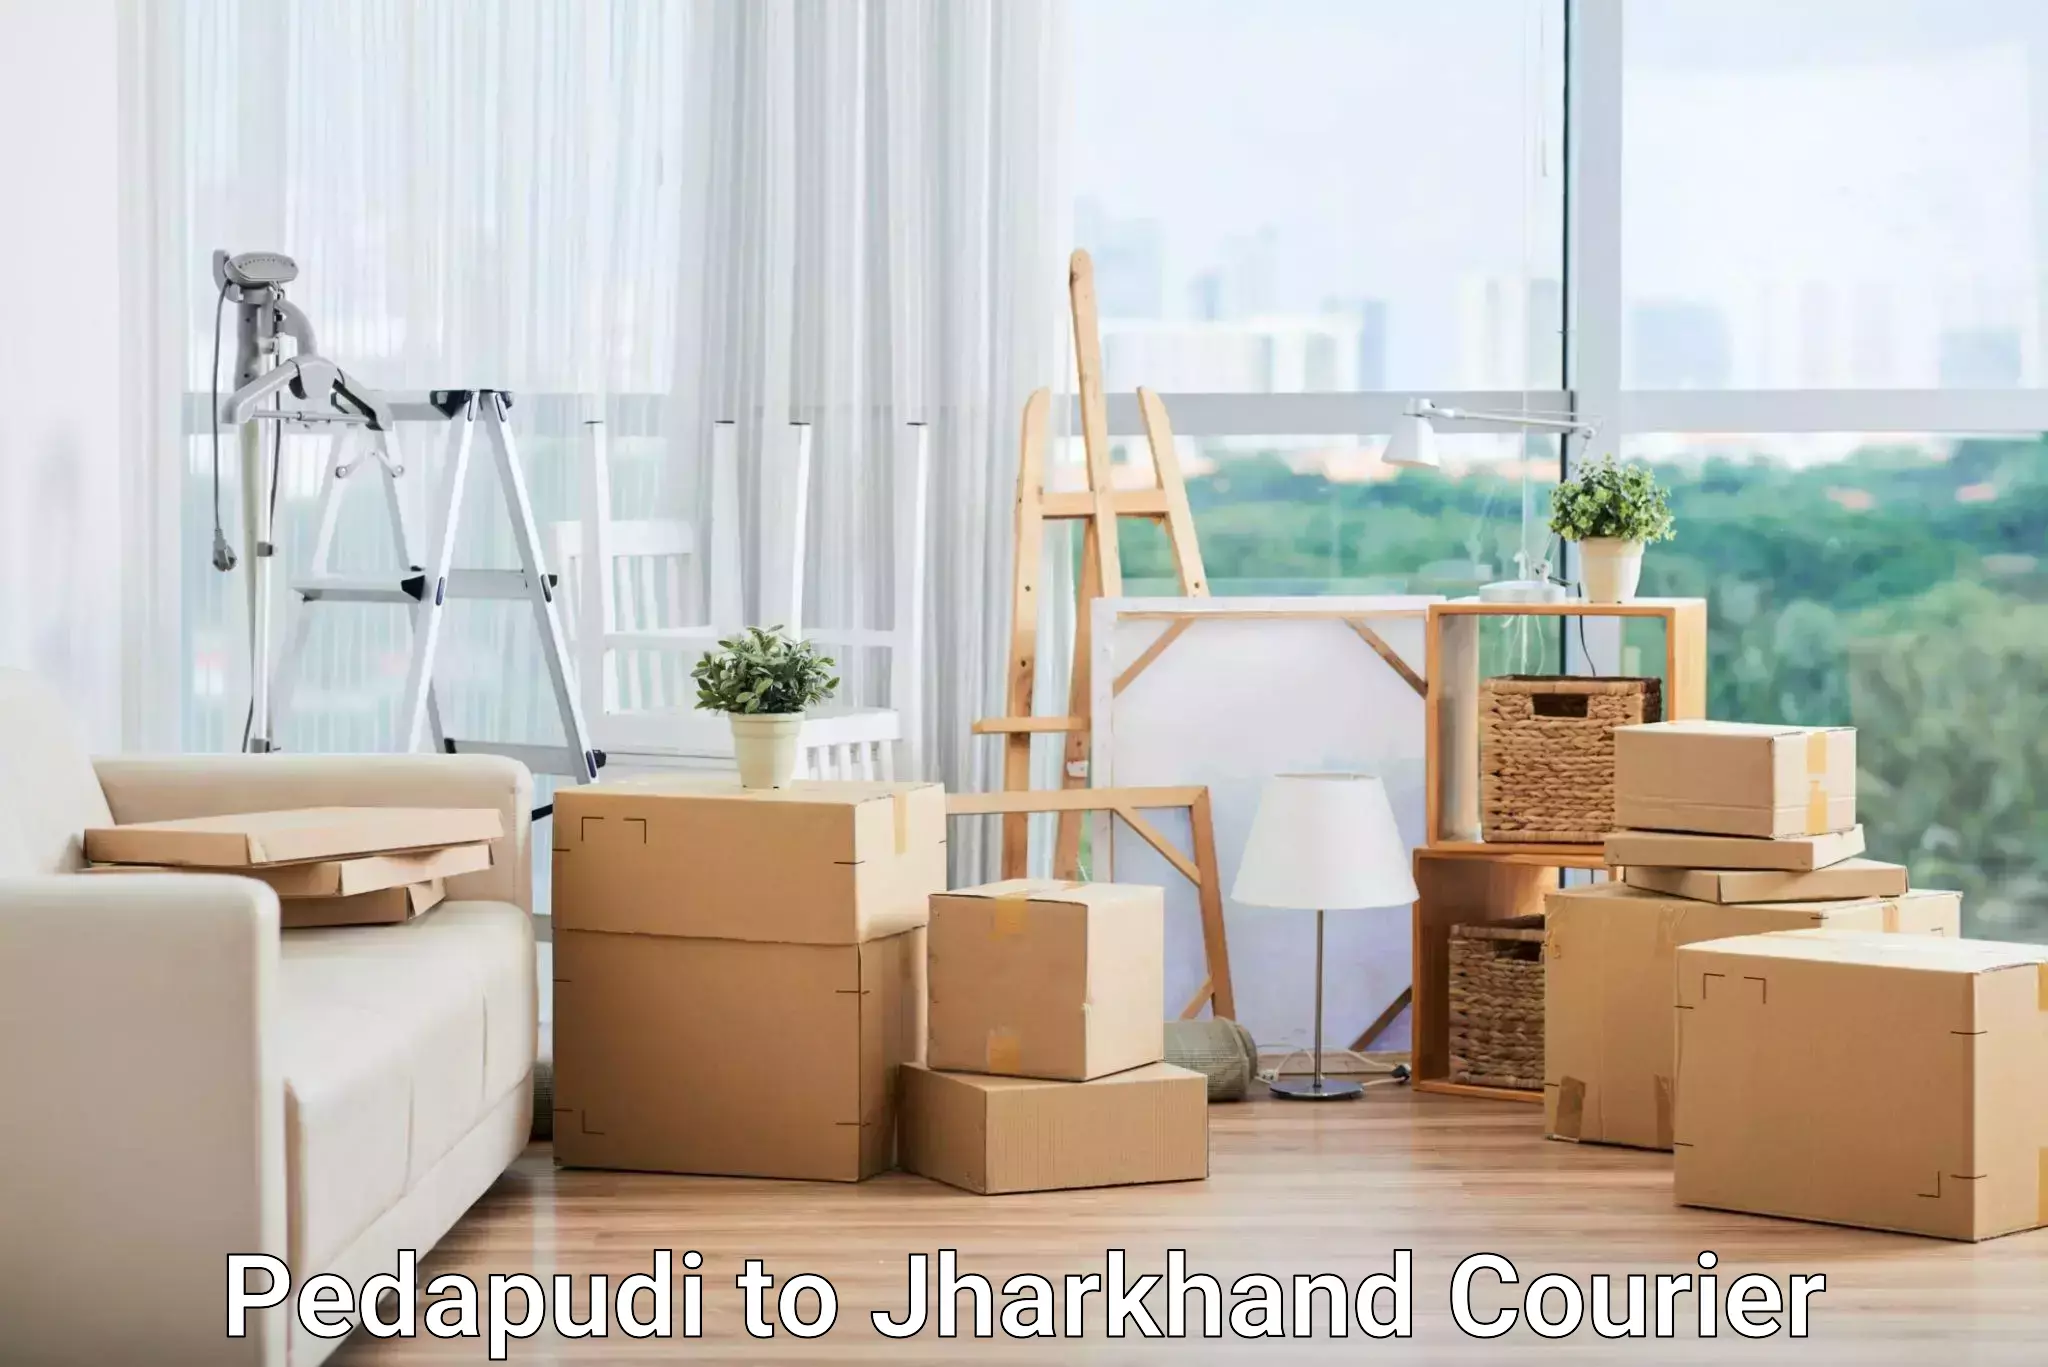 Courier service efficiency Pedapudi to Jharkhand